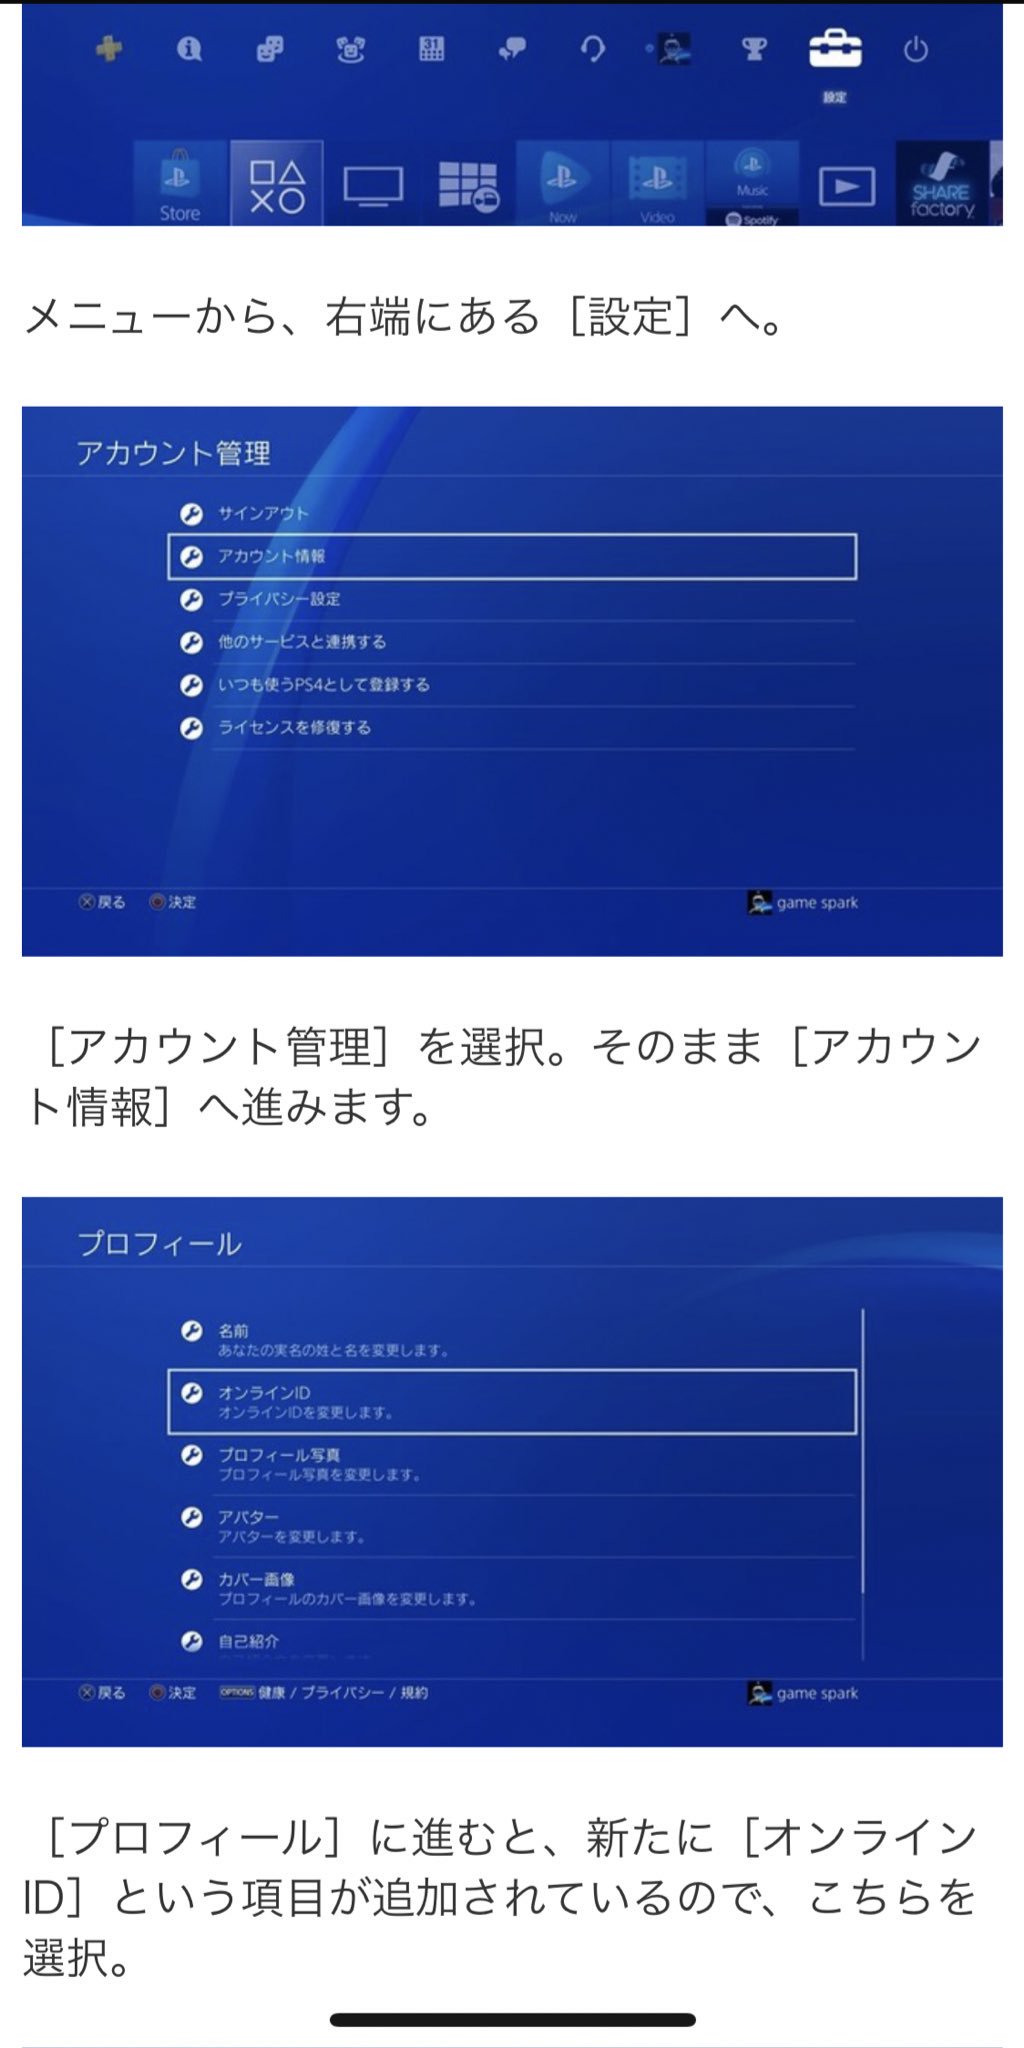 Ps4id変更 Twitter Search Twitter